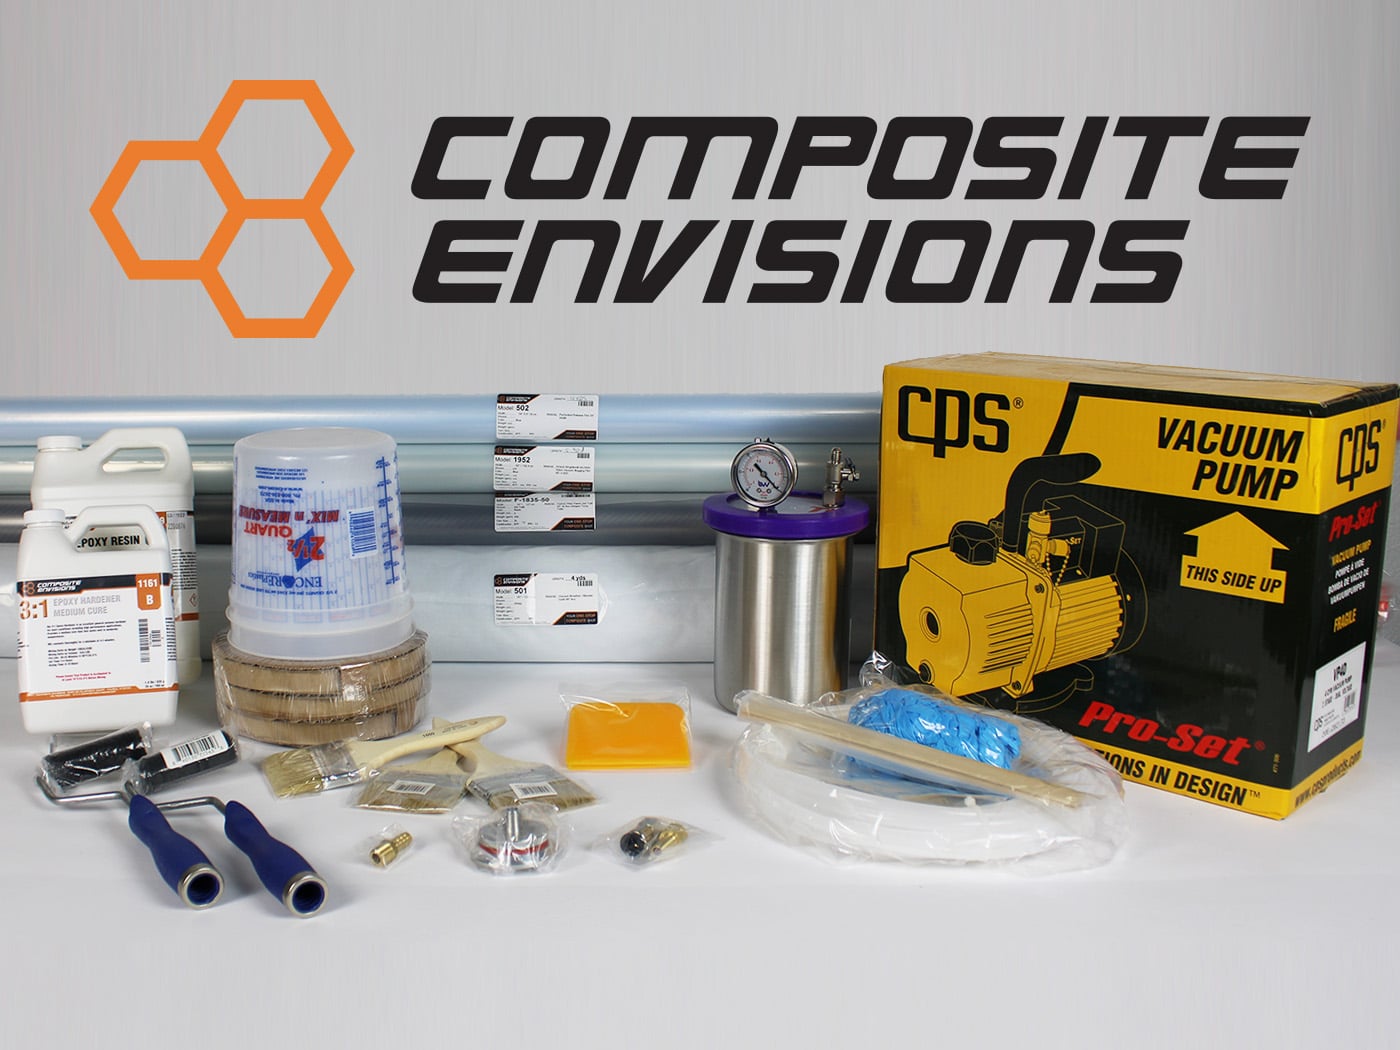 Mold Making Kit - Composite Envisions